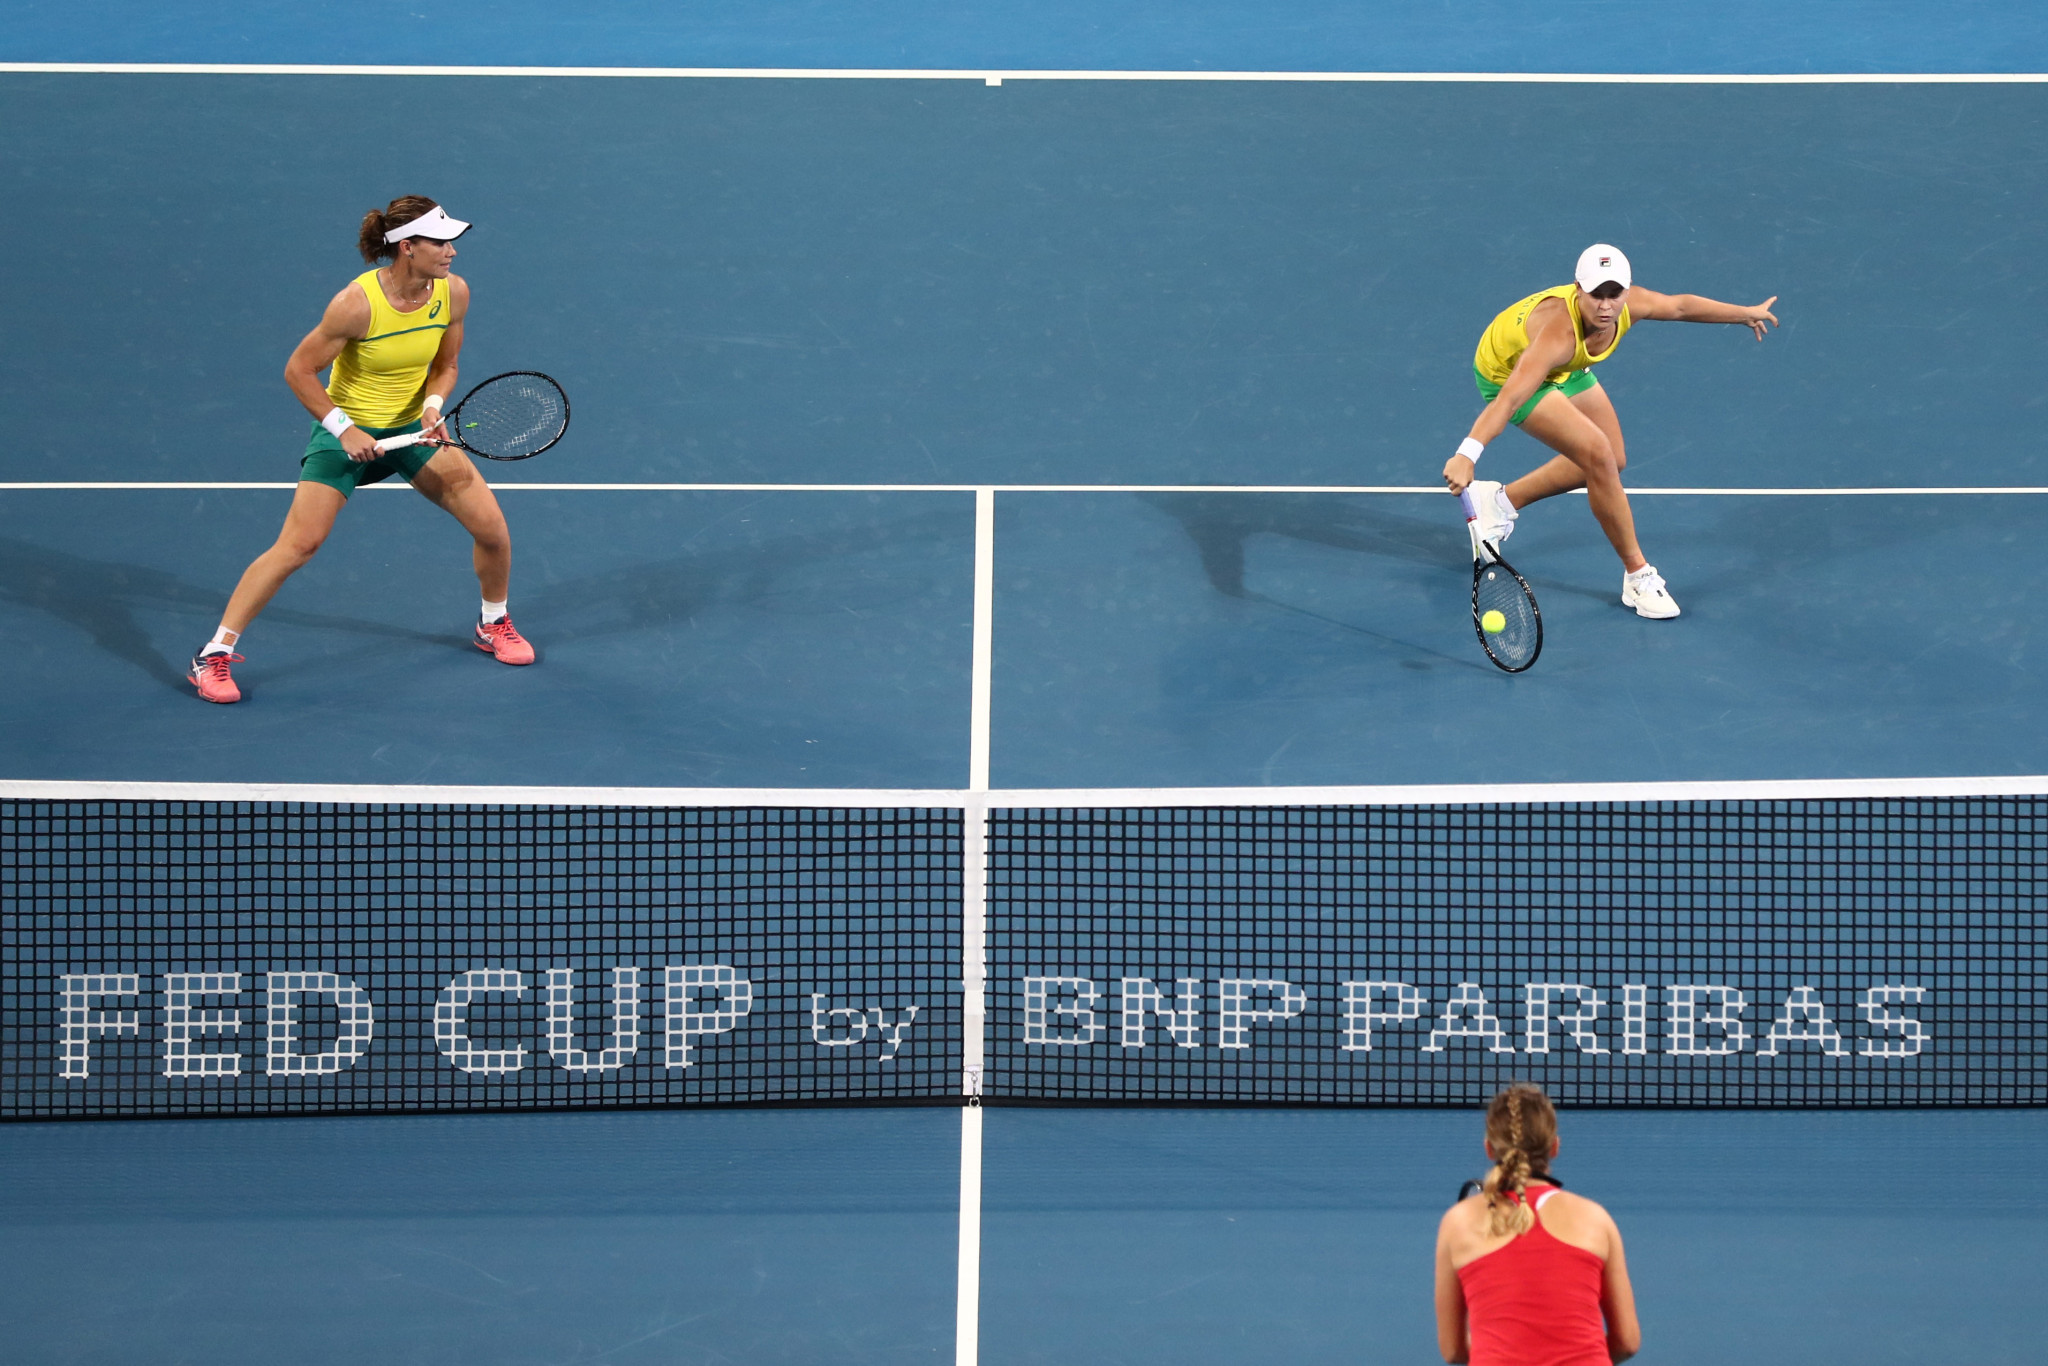 Ashleigh Barty and Samantha Stosur beat Victoria Azarenka and Aryna Sabalenka in the deciding doubles rubber of their Fed Cup semi-final in Brisbane ©Getty Images